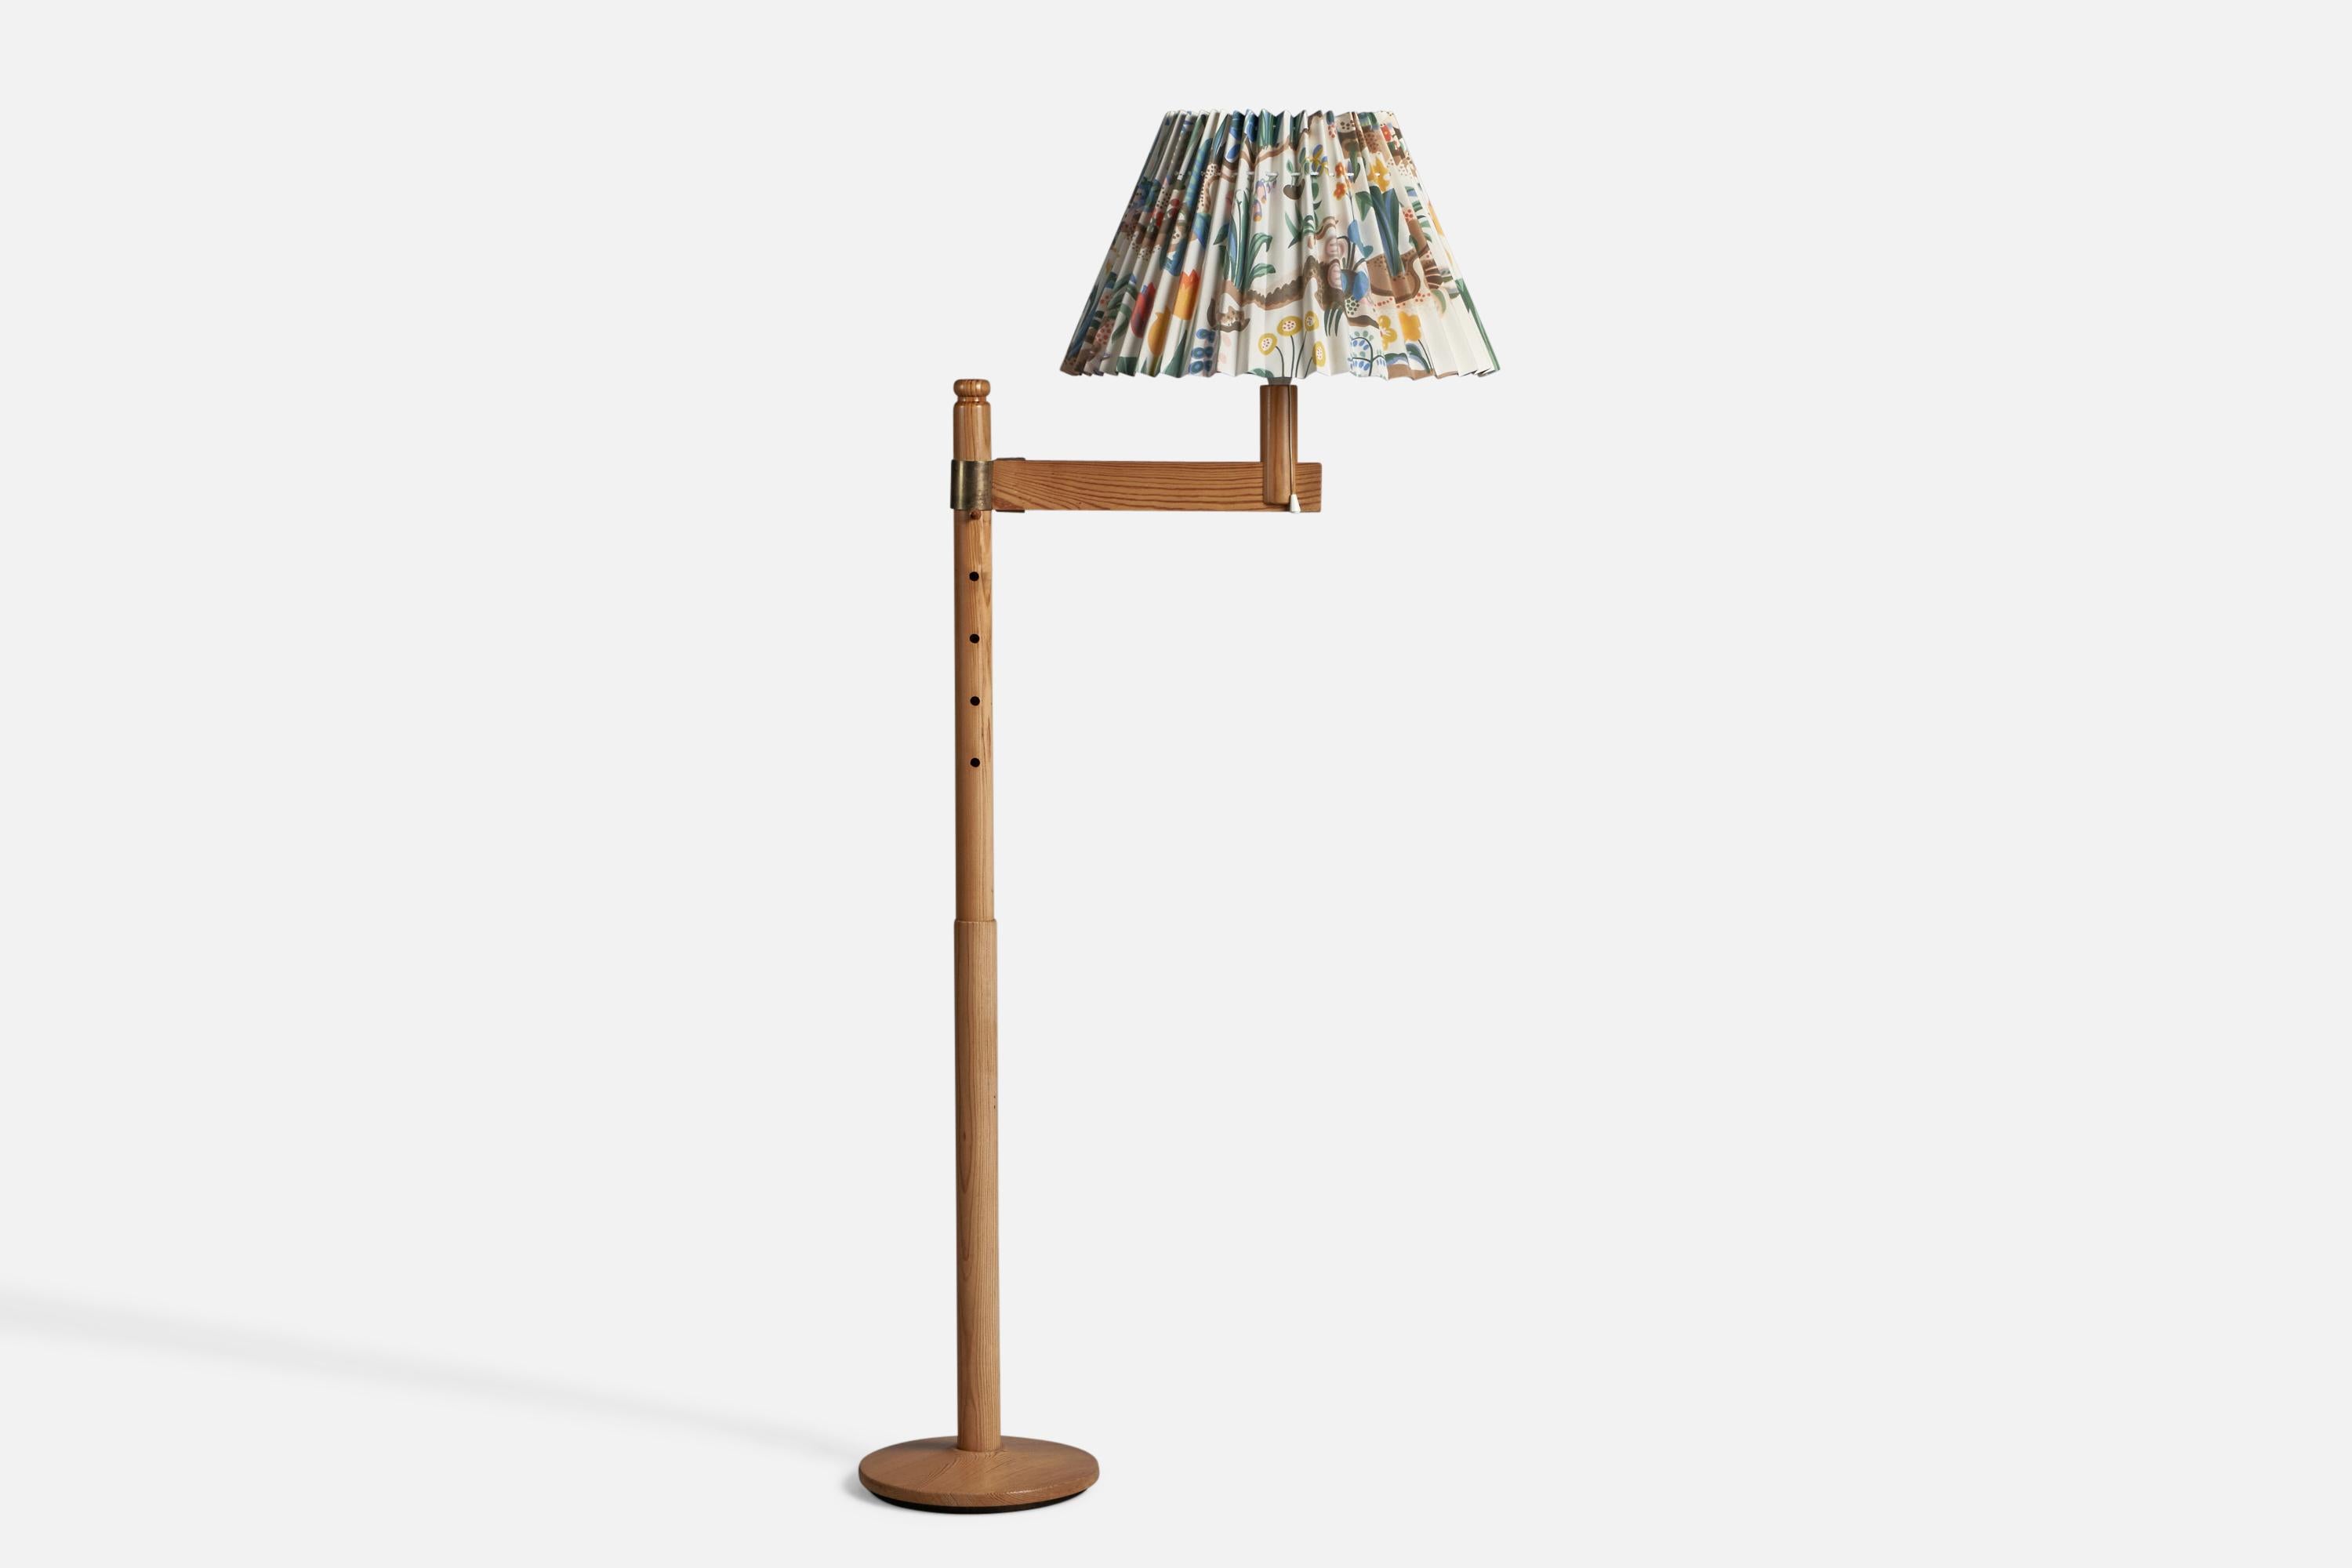 An adjustable pine, brass and floral printed fabric floor lamp, designed and produced in Sweden, 1970s.

Overall Dimensions (inches): 55